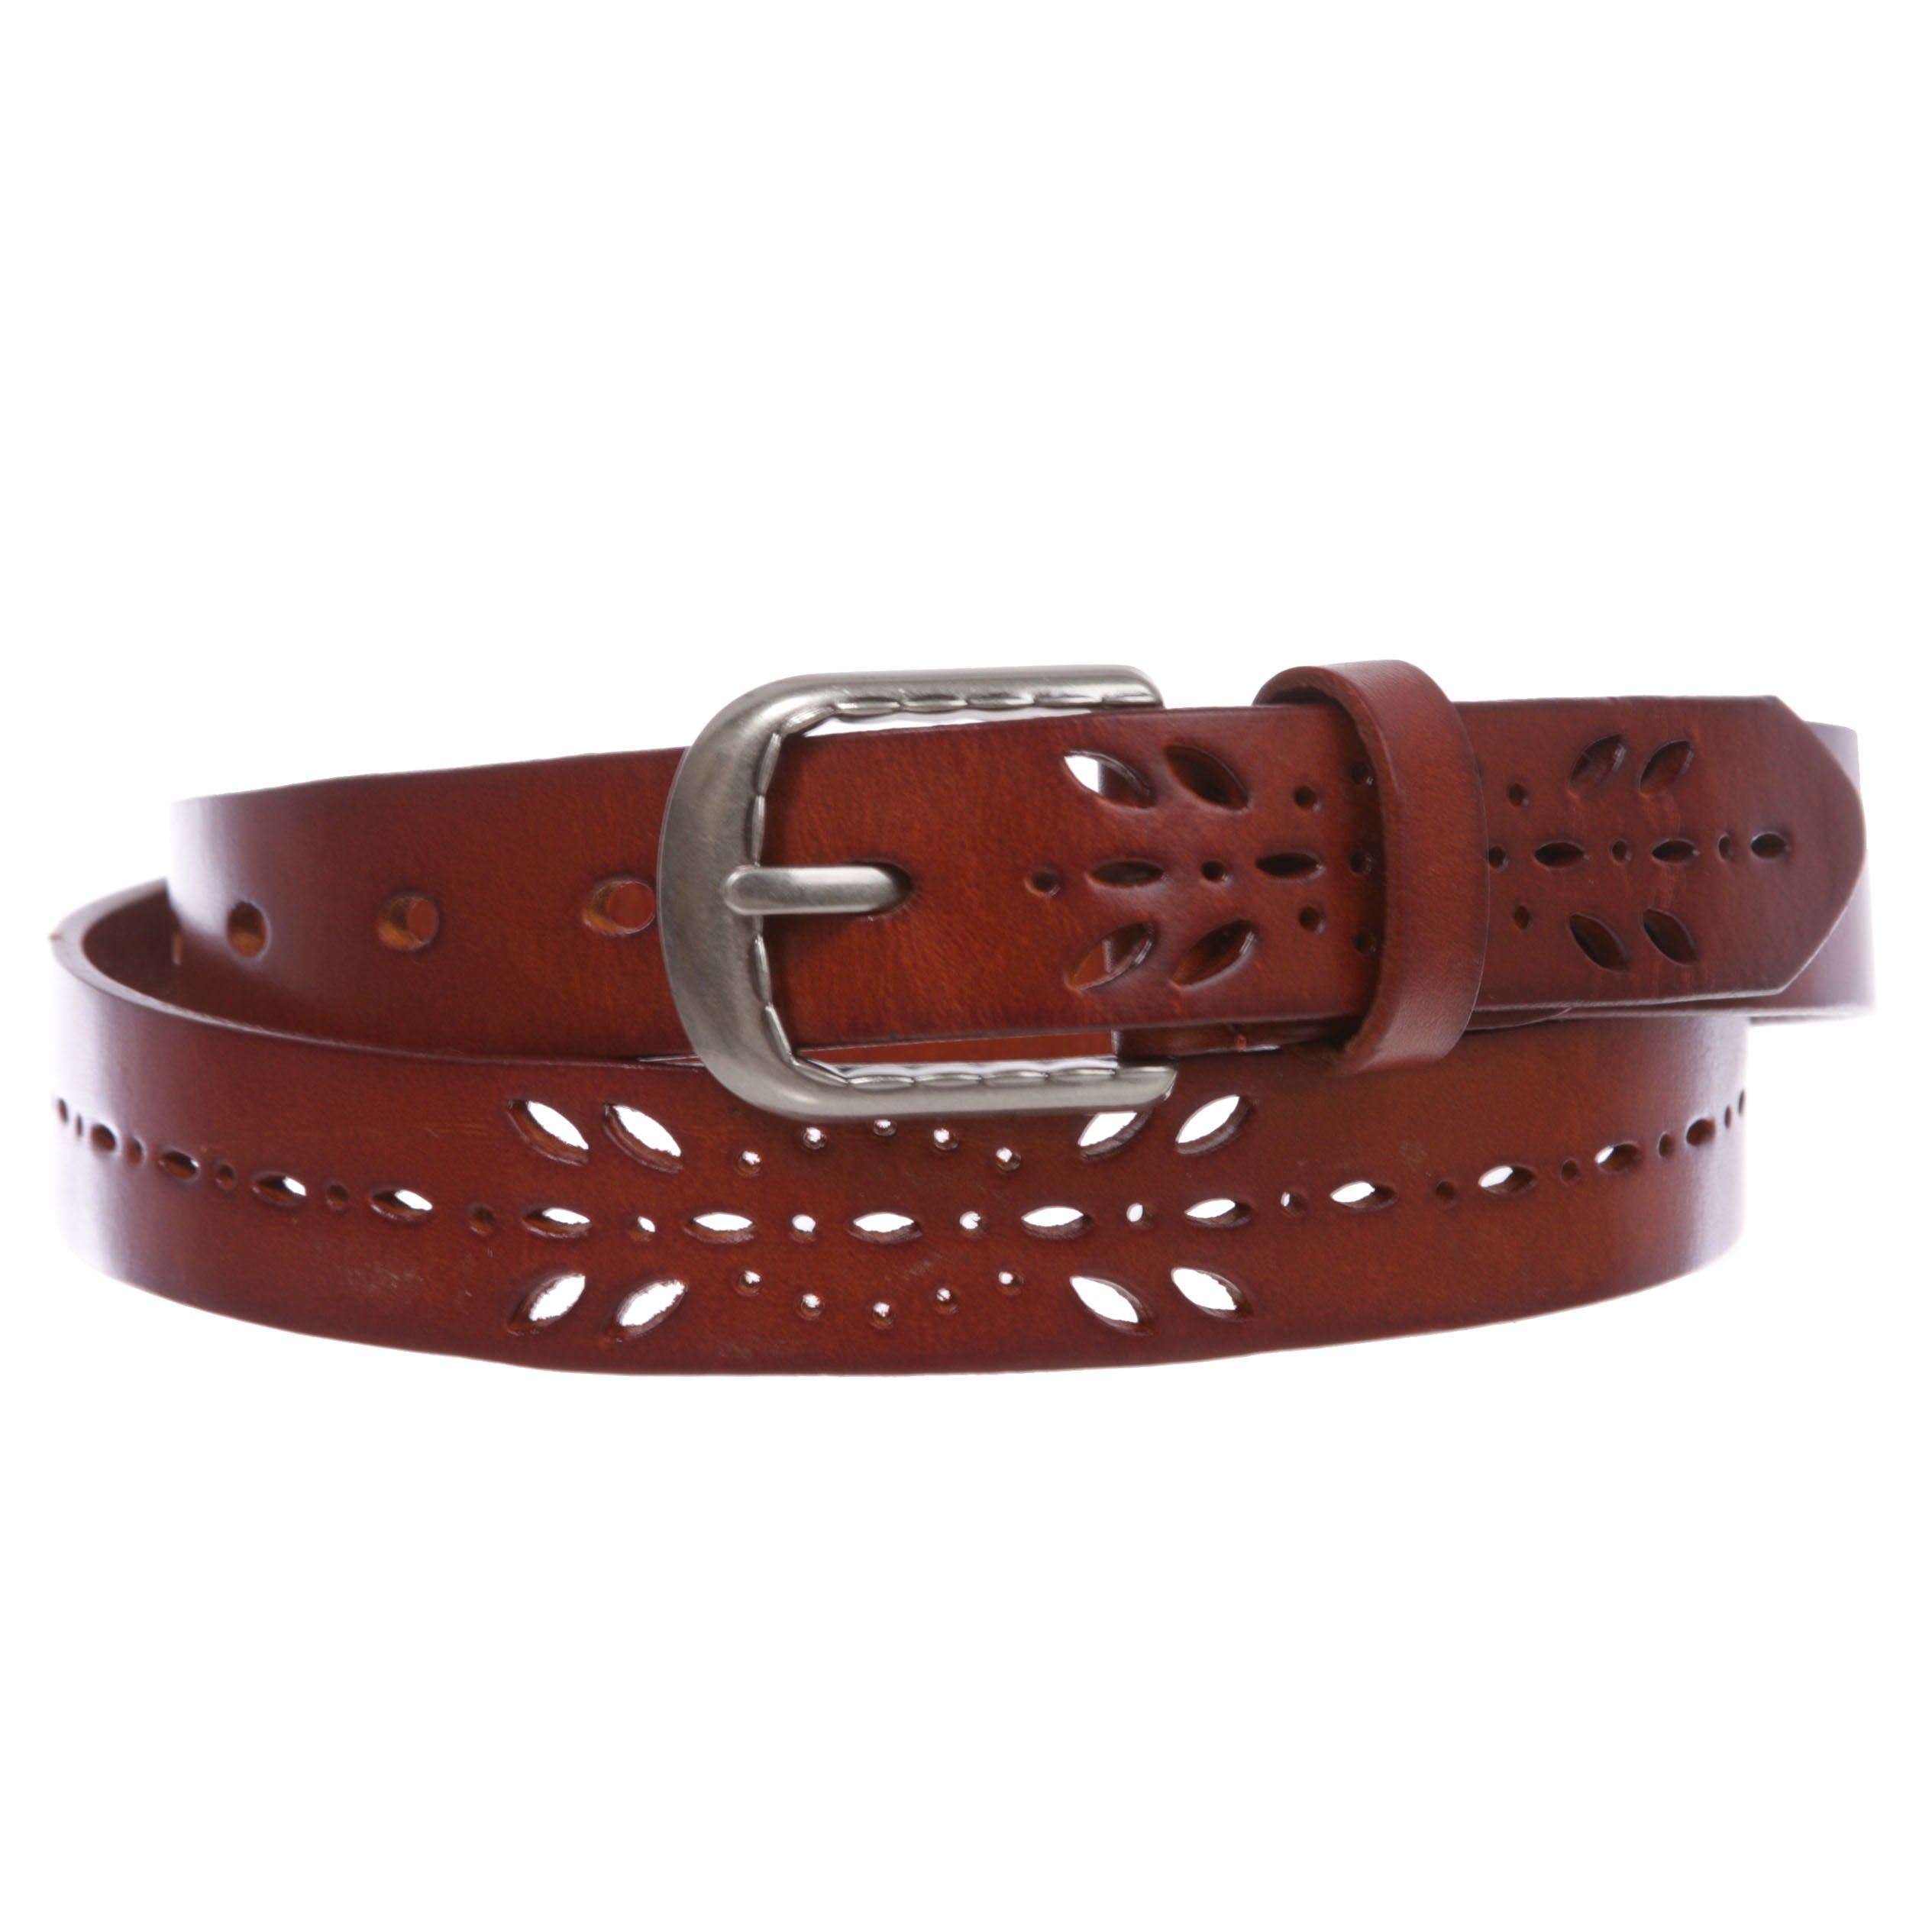 Women's 1 1/8" (28 mm) Perforated Cowhide Full Grain Leather Casual Jean Belt